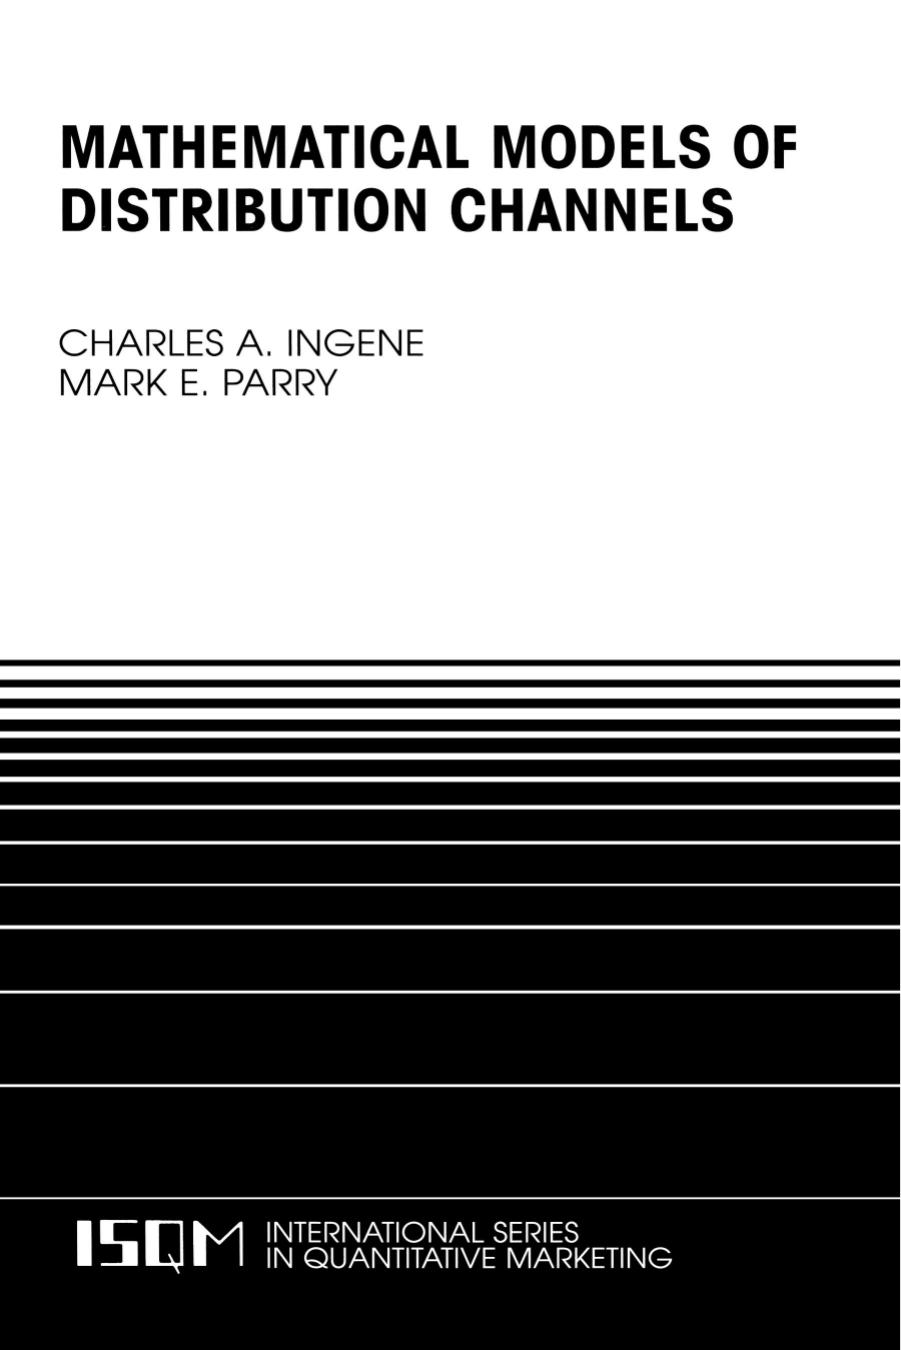 Charles A. Ingene, Mark E. Parry Mathematical Models of Distribution Channels International Series in Quantitative Marketing 2004